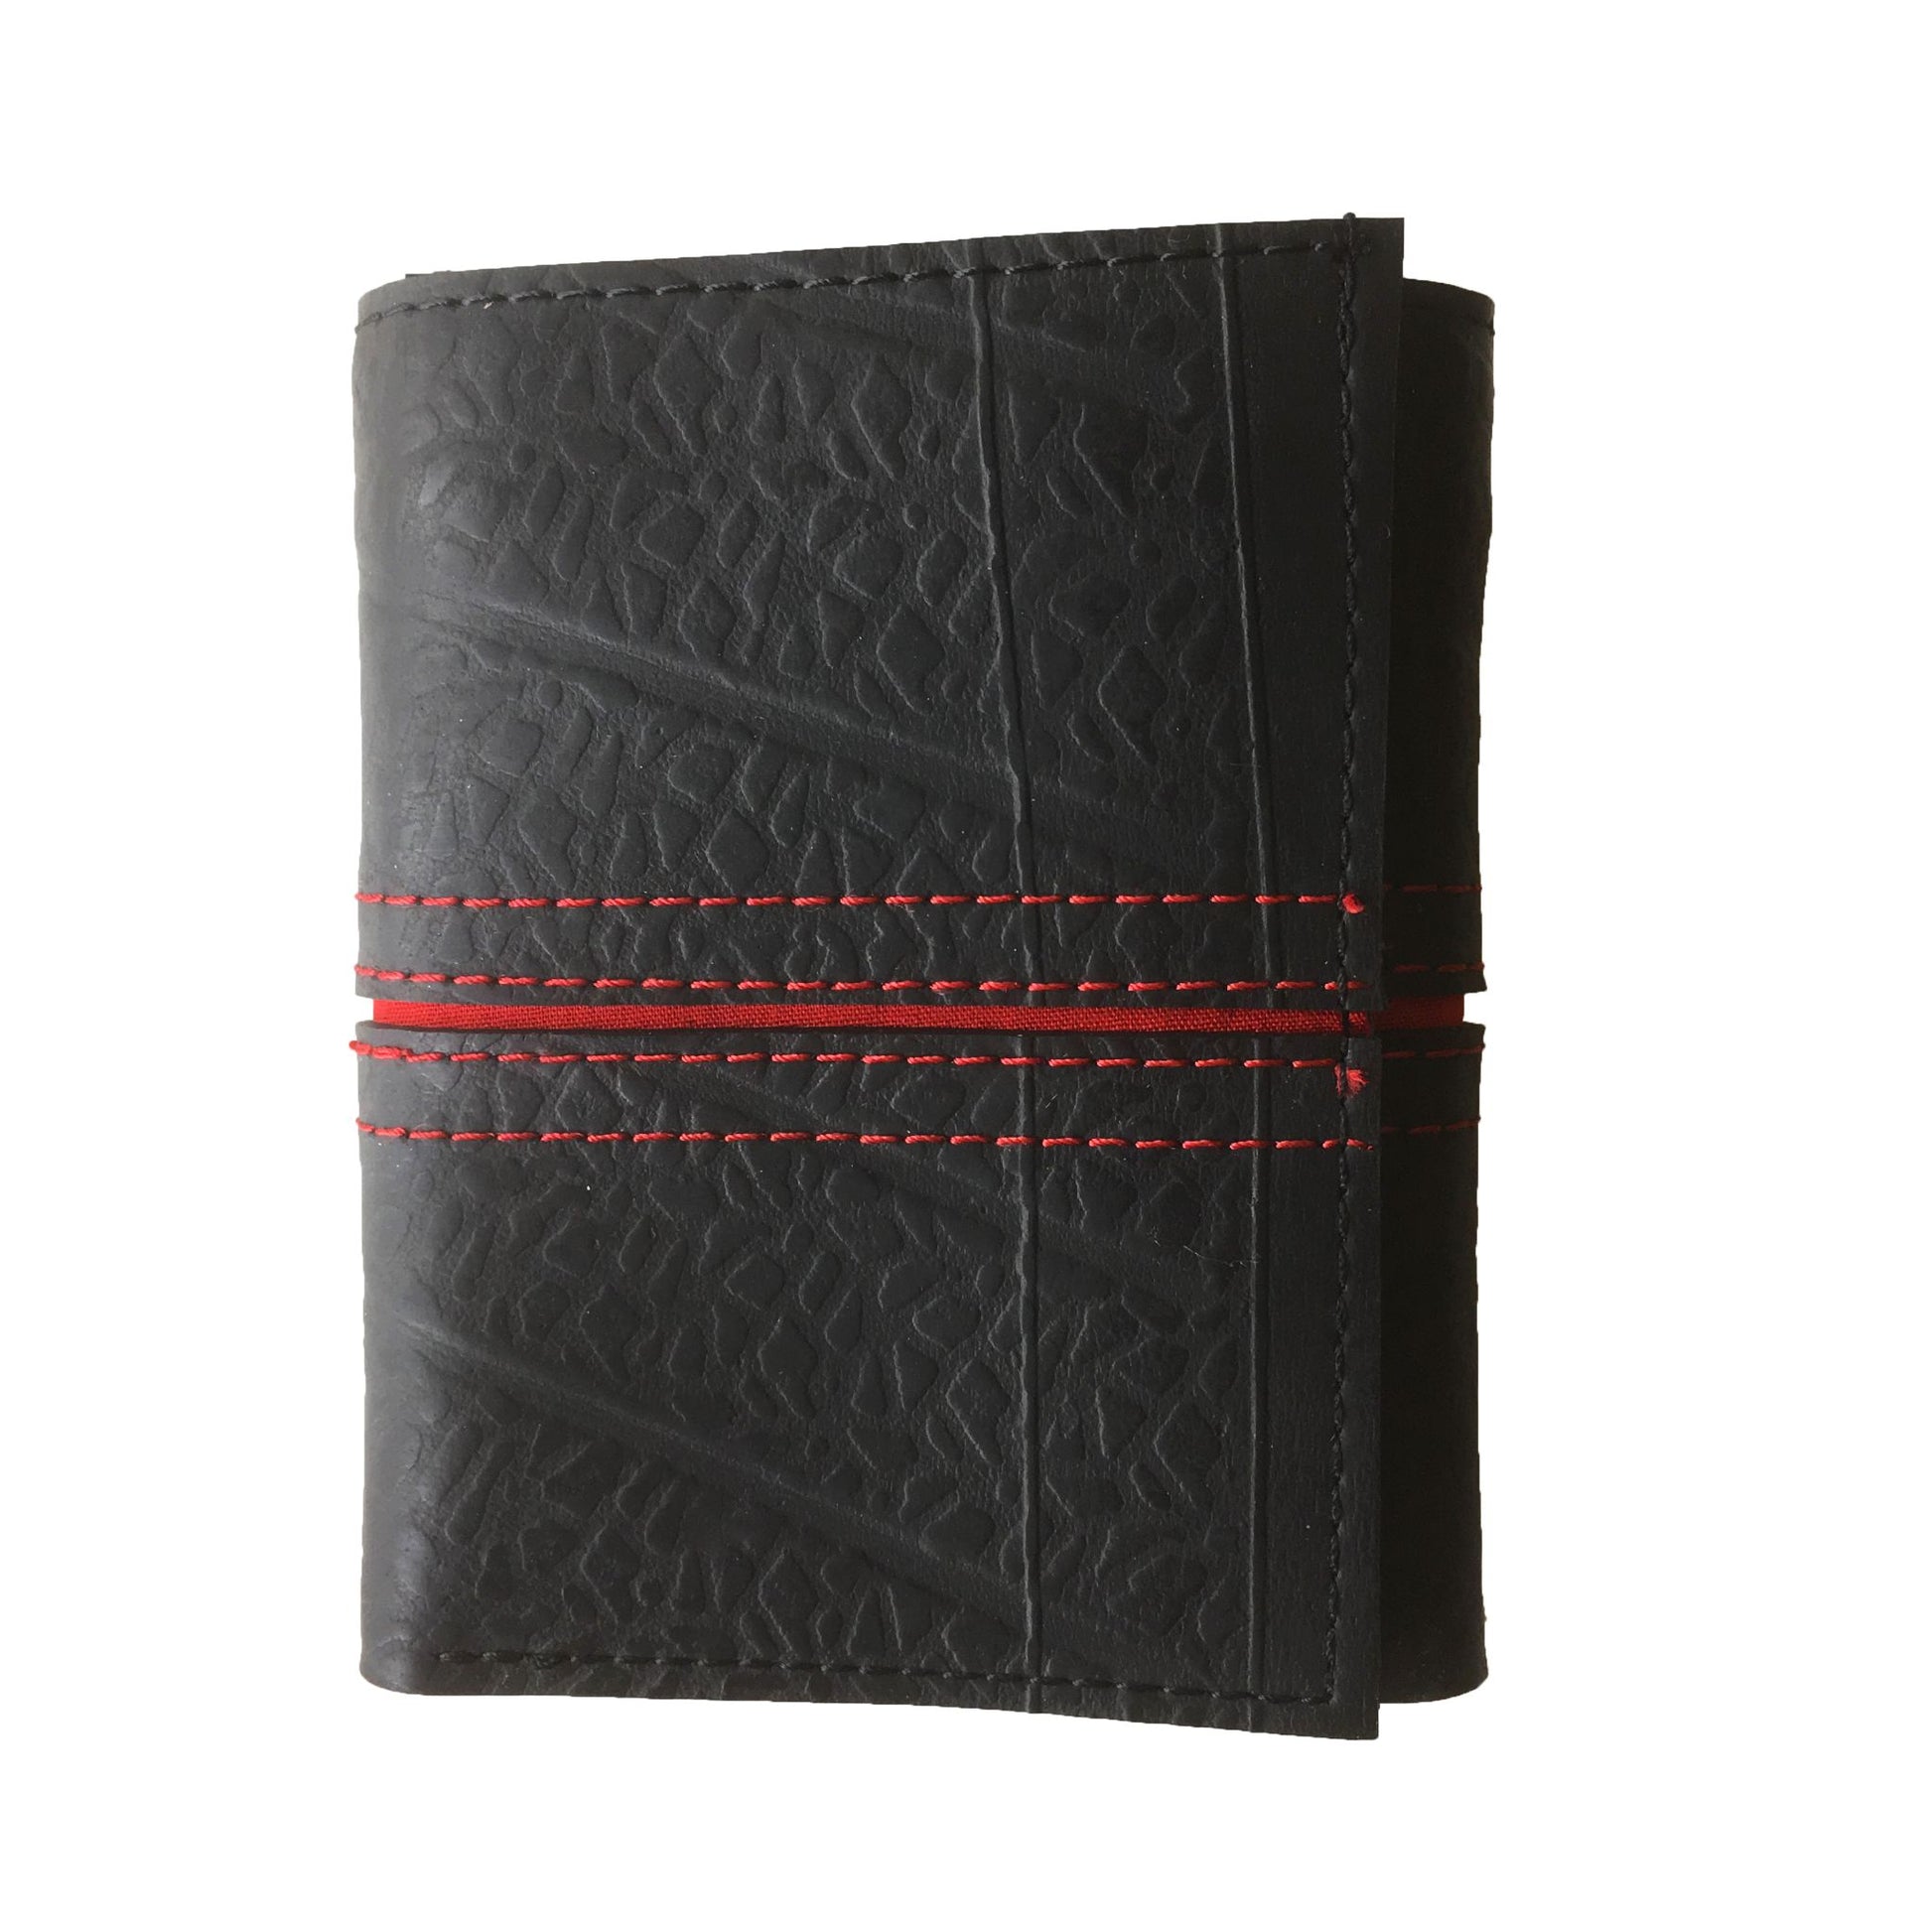 Trifold Recycled Wallet made from Inner Tubes - red thread